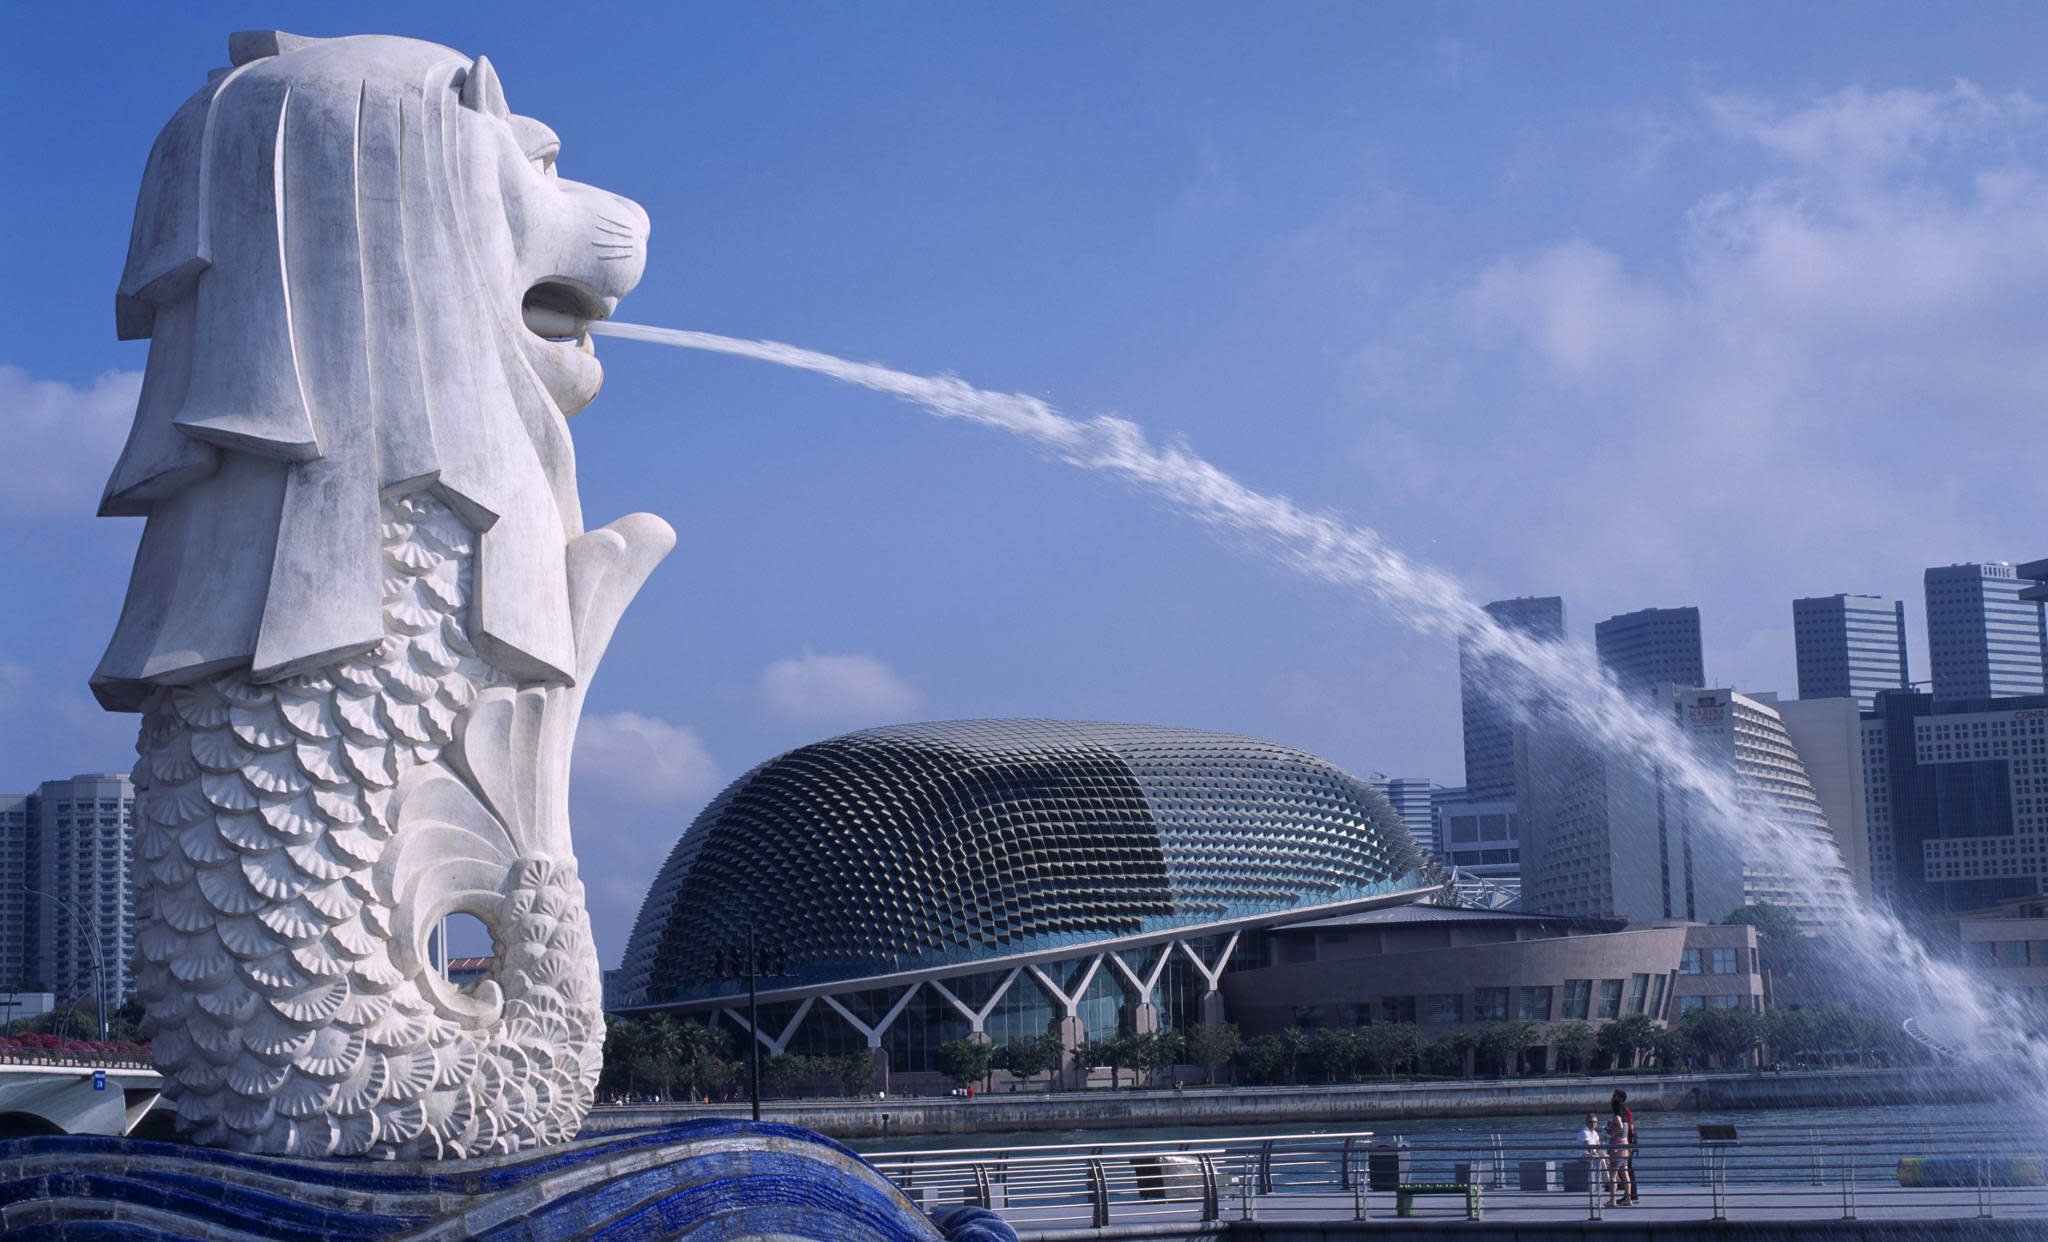 MerLion Monument Fountain in Singapore - the "Lion City"